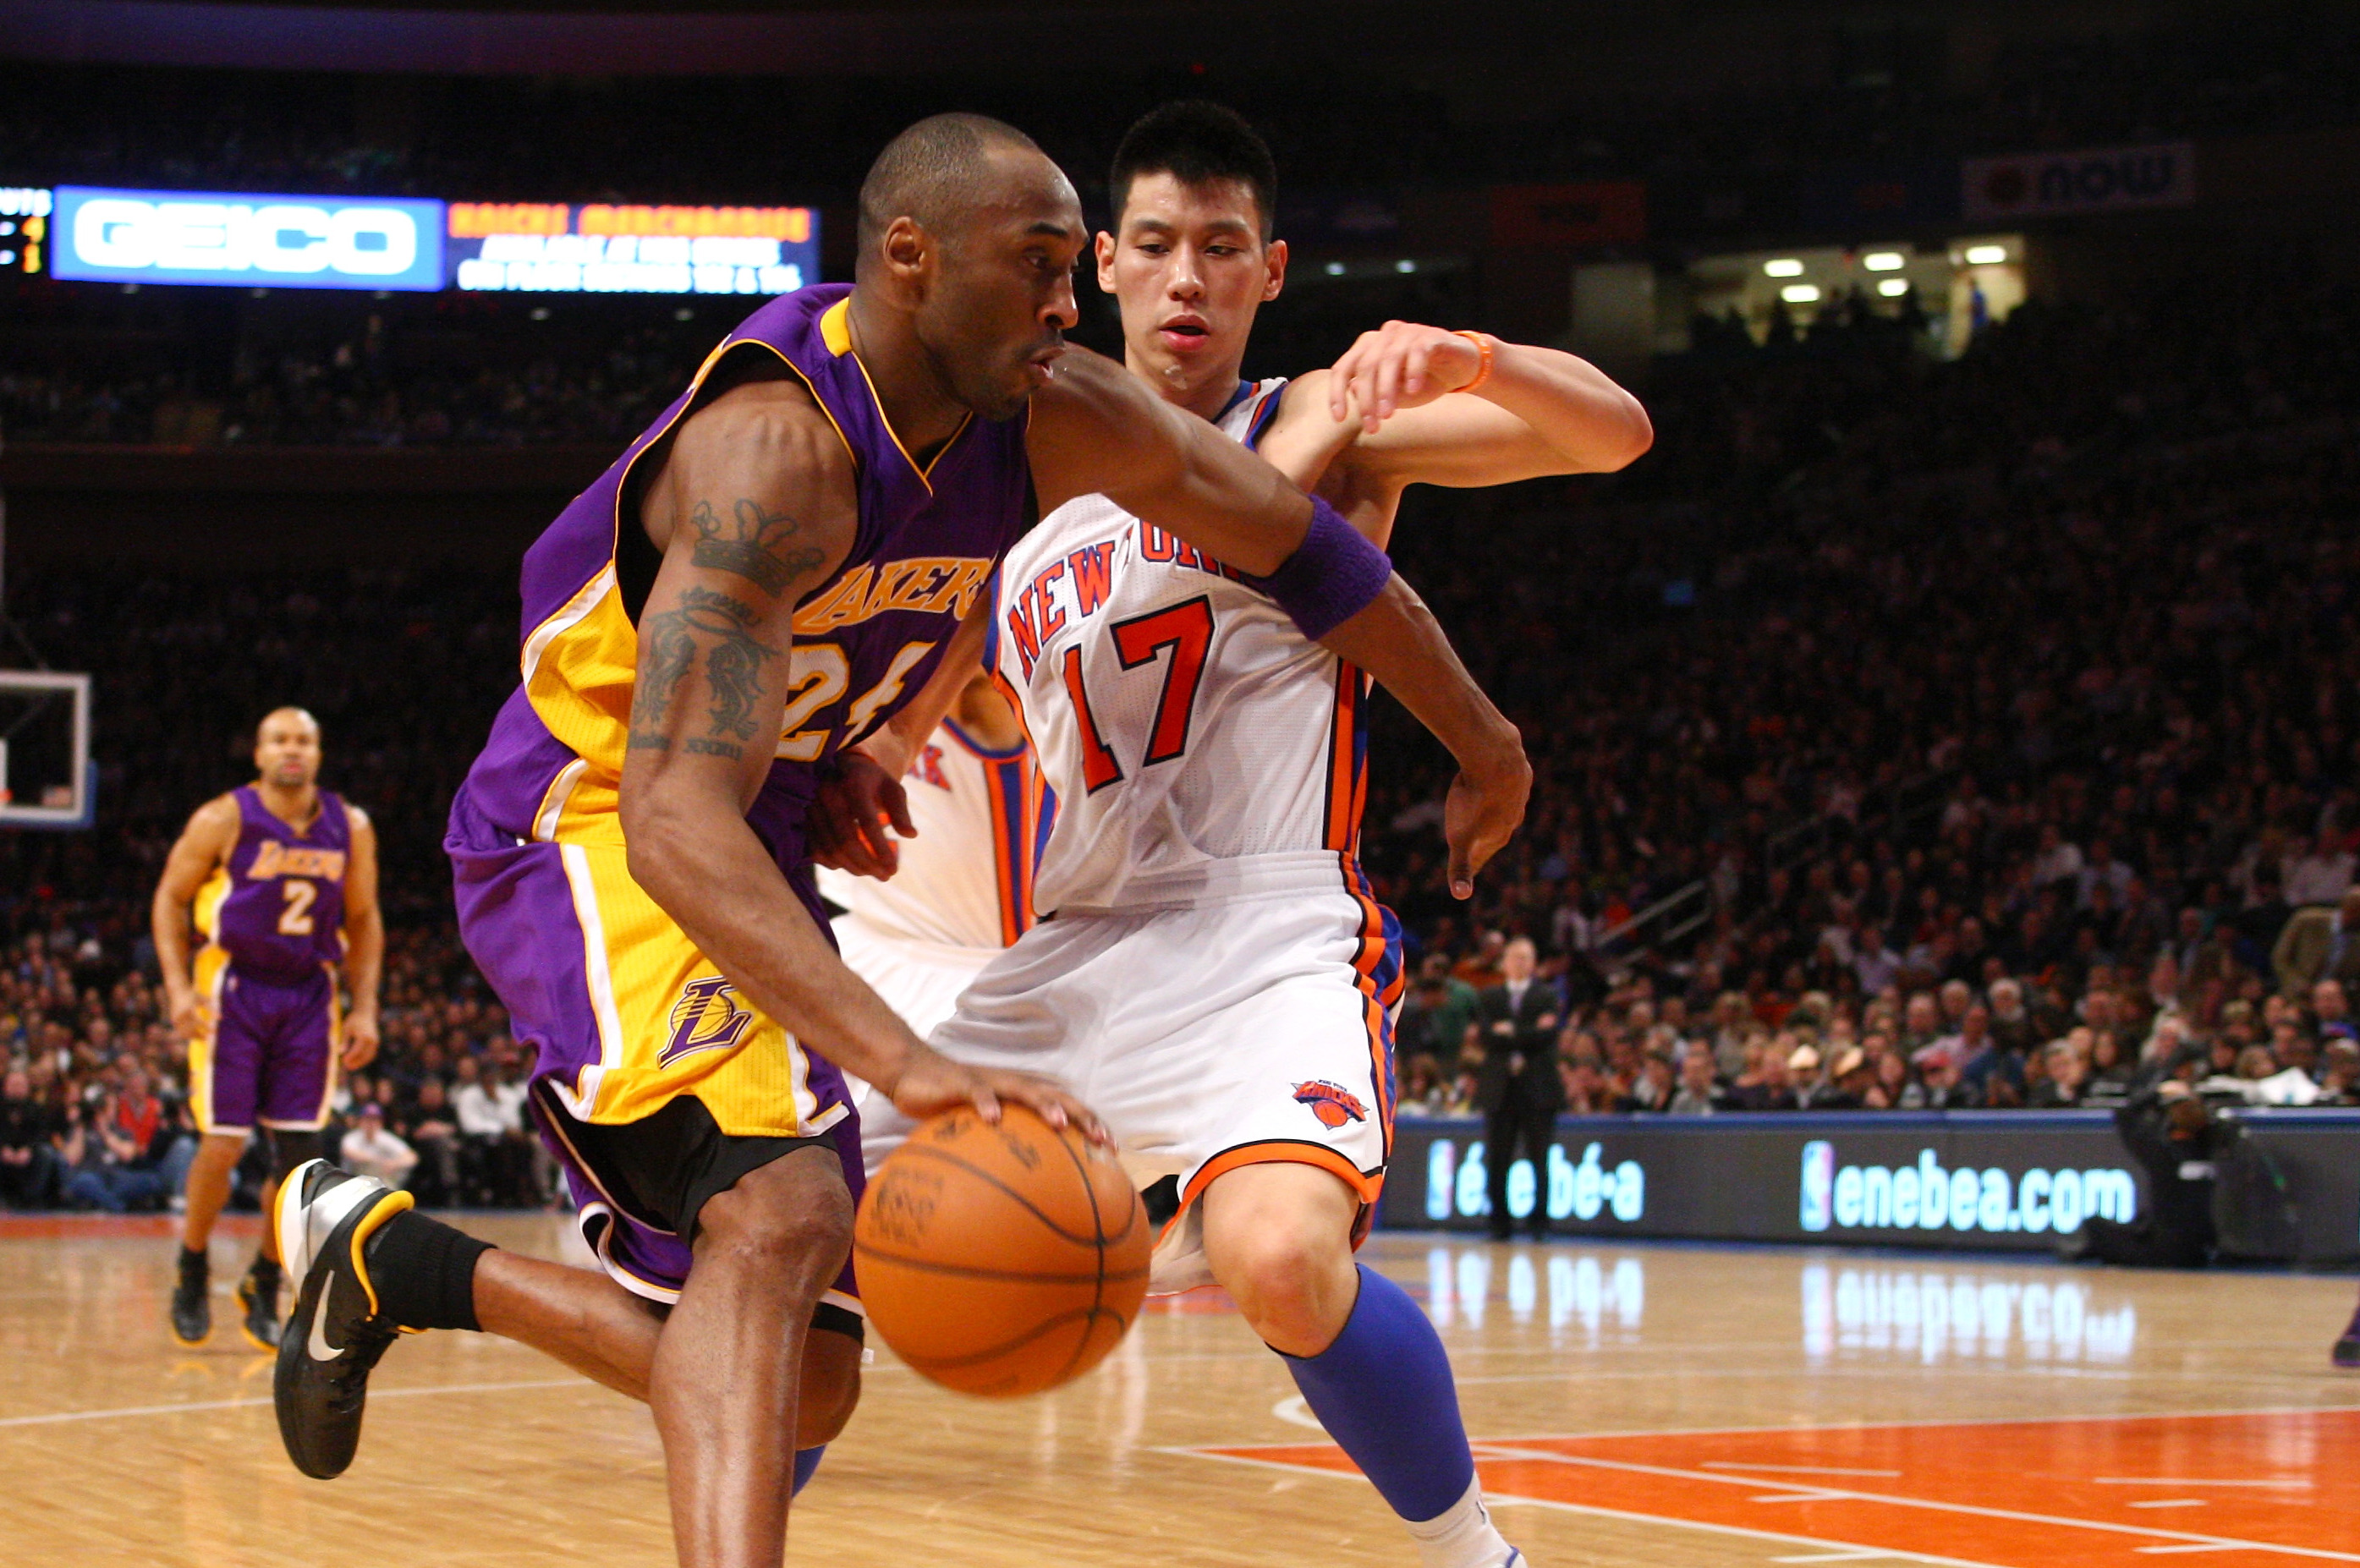 The Game Jeremy Lin SHOCKED Kobe Bryant & The Lakers! SICK Duel